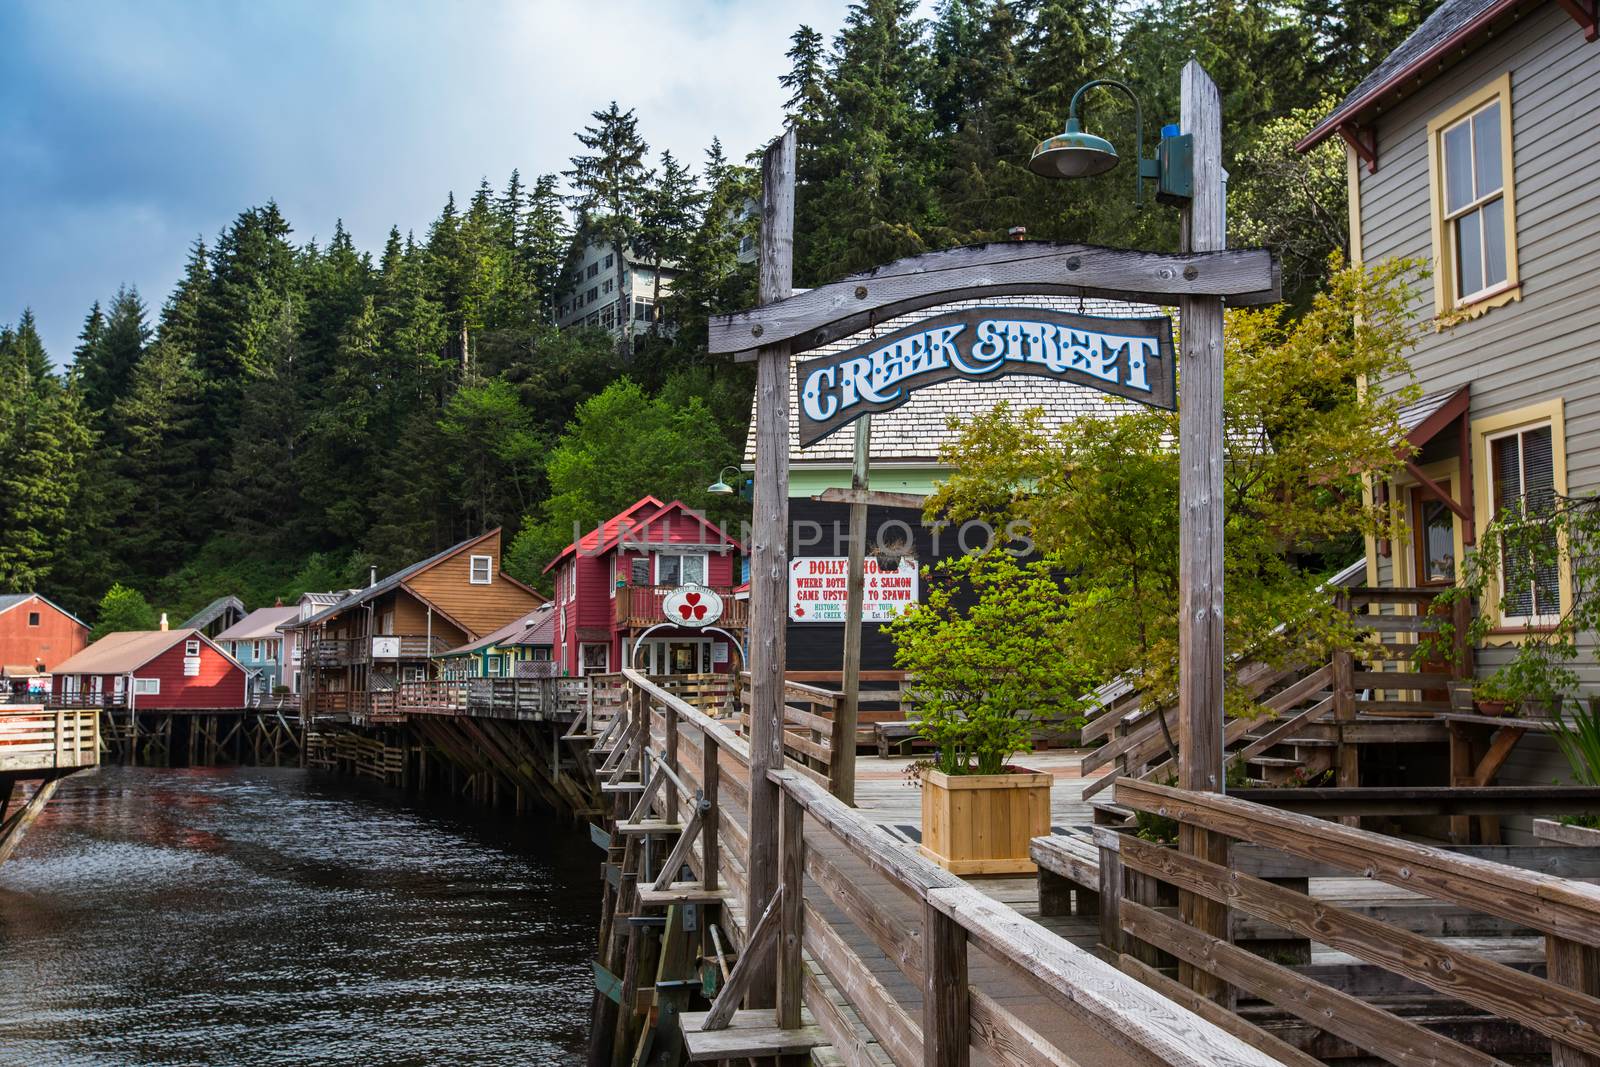 KETCHIKAN, AK - MAY 15: Current businesses relying on tourism occupying historic buildings on Creek Street on May 15, 2016 in Ketchikan, AK.